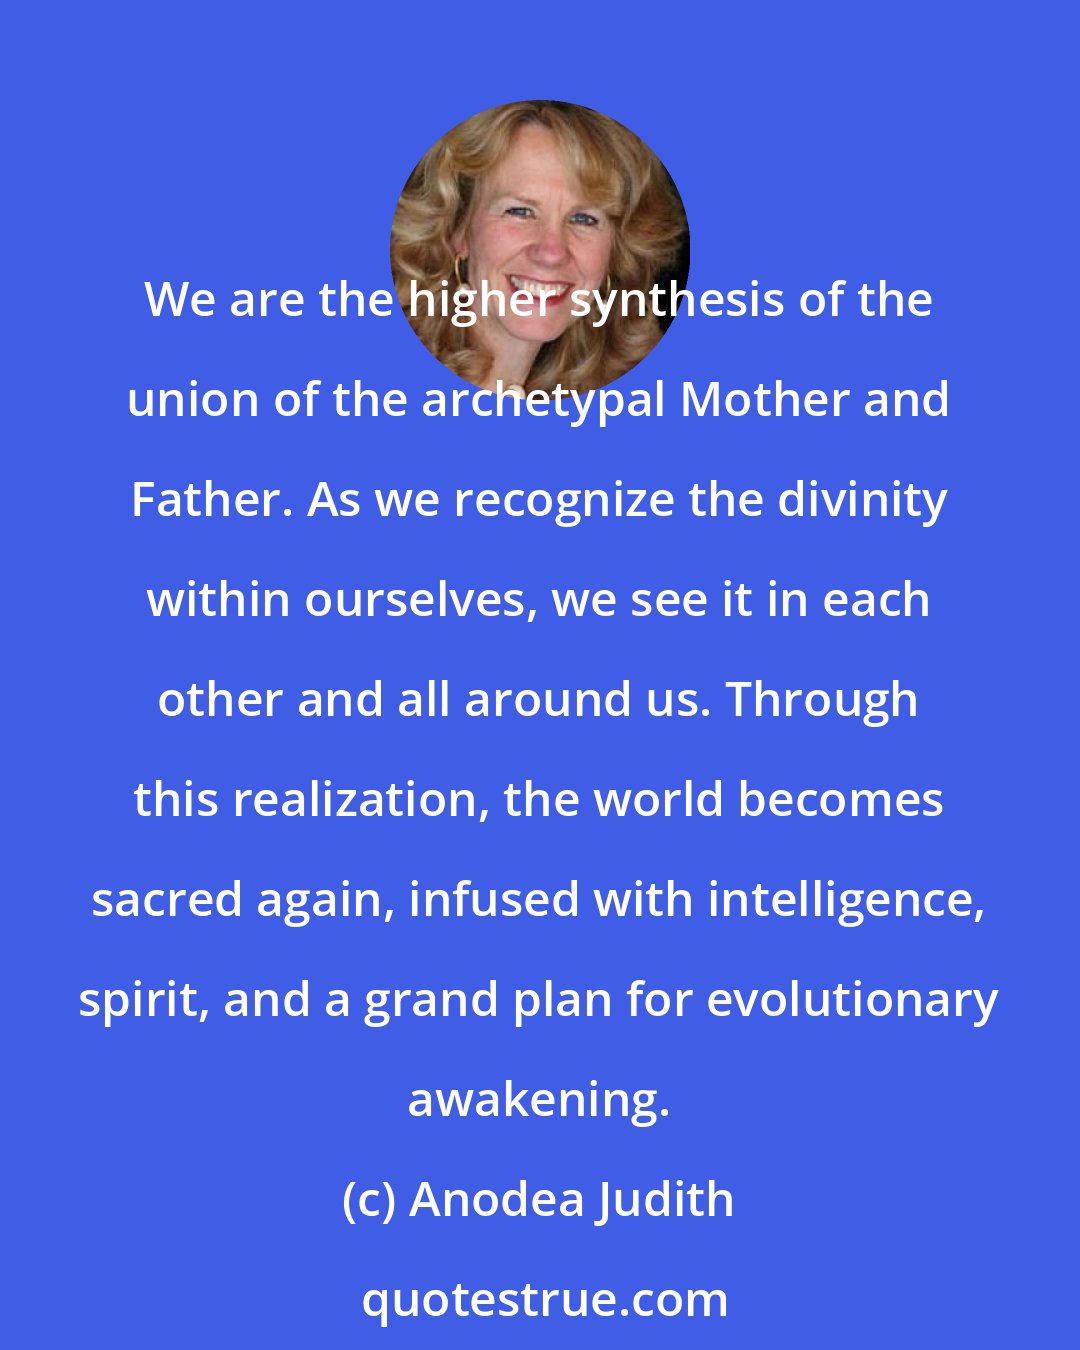 Anodea Judith: We are the higher synthesis of the union of the archetypal Mother and Father. As we recognize the divinity within ourselves, we see it in each other and all around us. Through this realization, the world becomes sacred again, infused with intelligence, spirit, and a grand plan for evolutionary awakening.